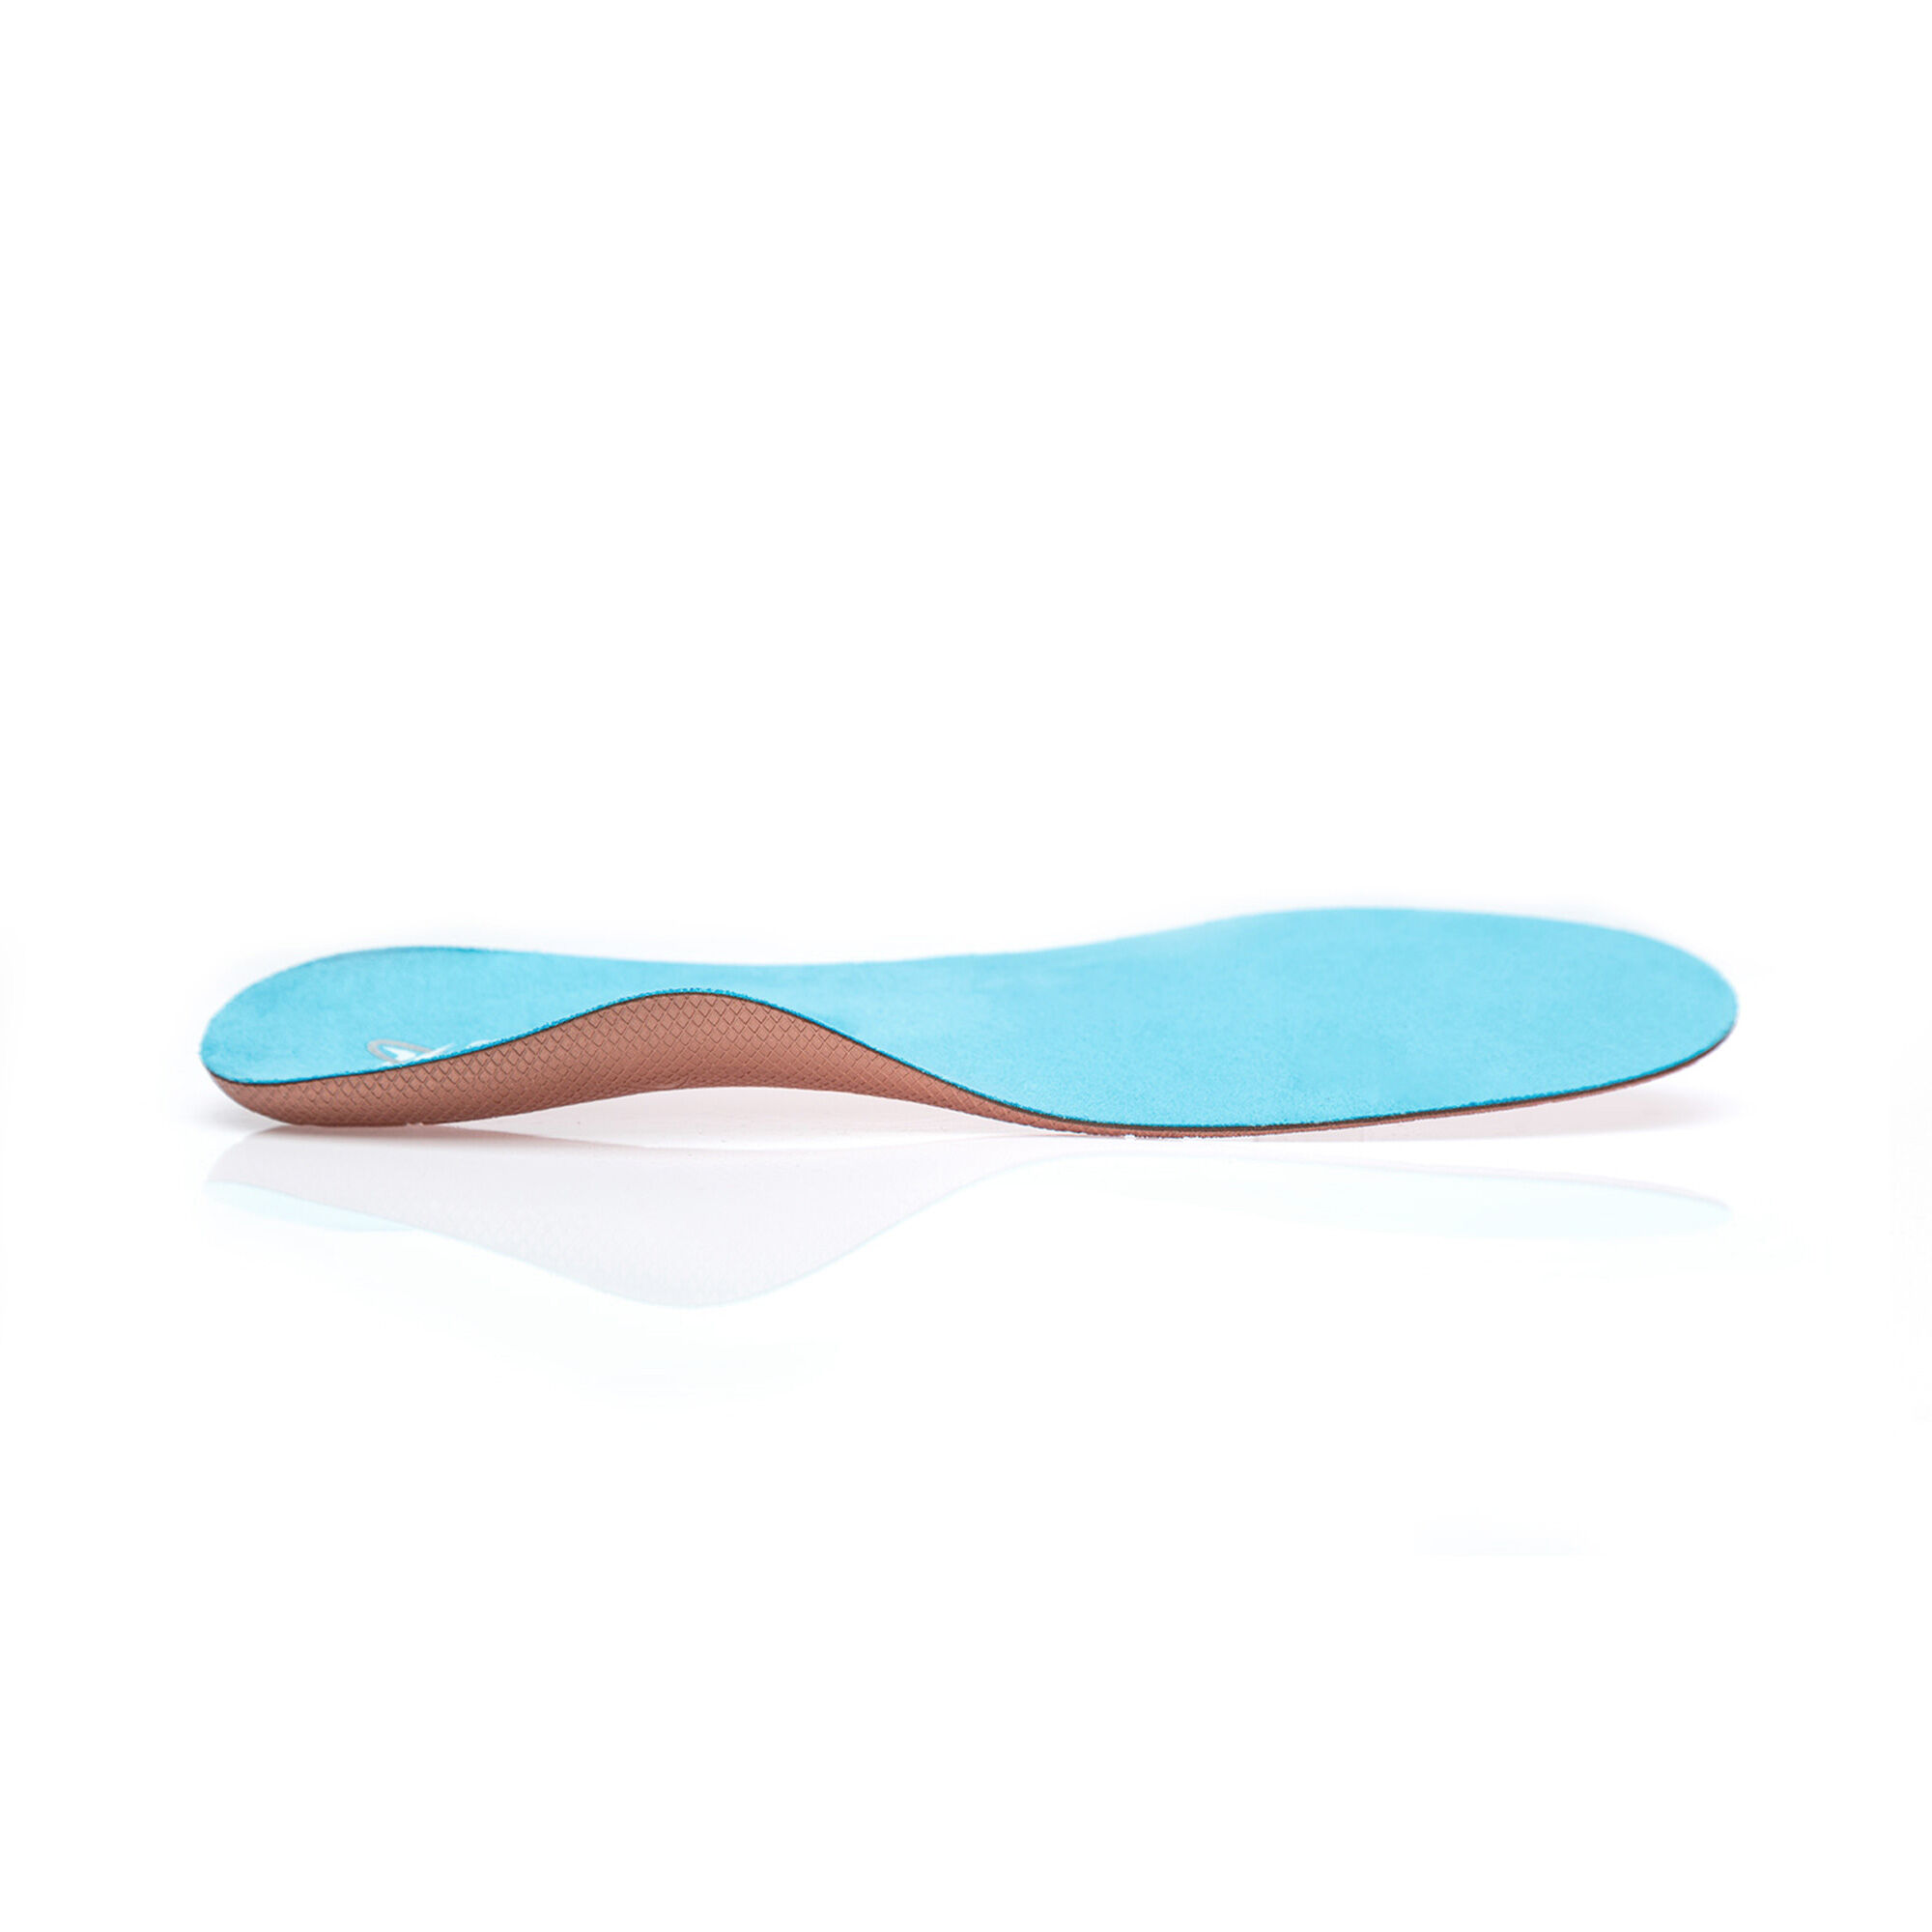 Insole for shoes without removable insoles